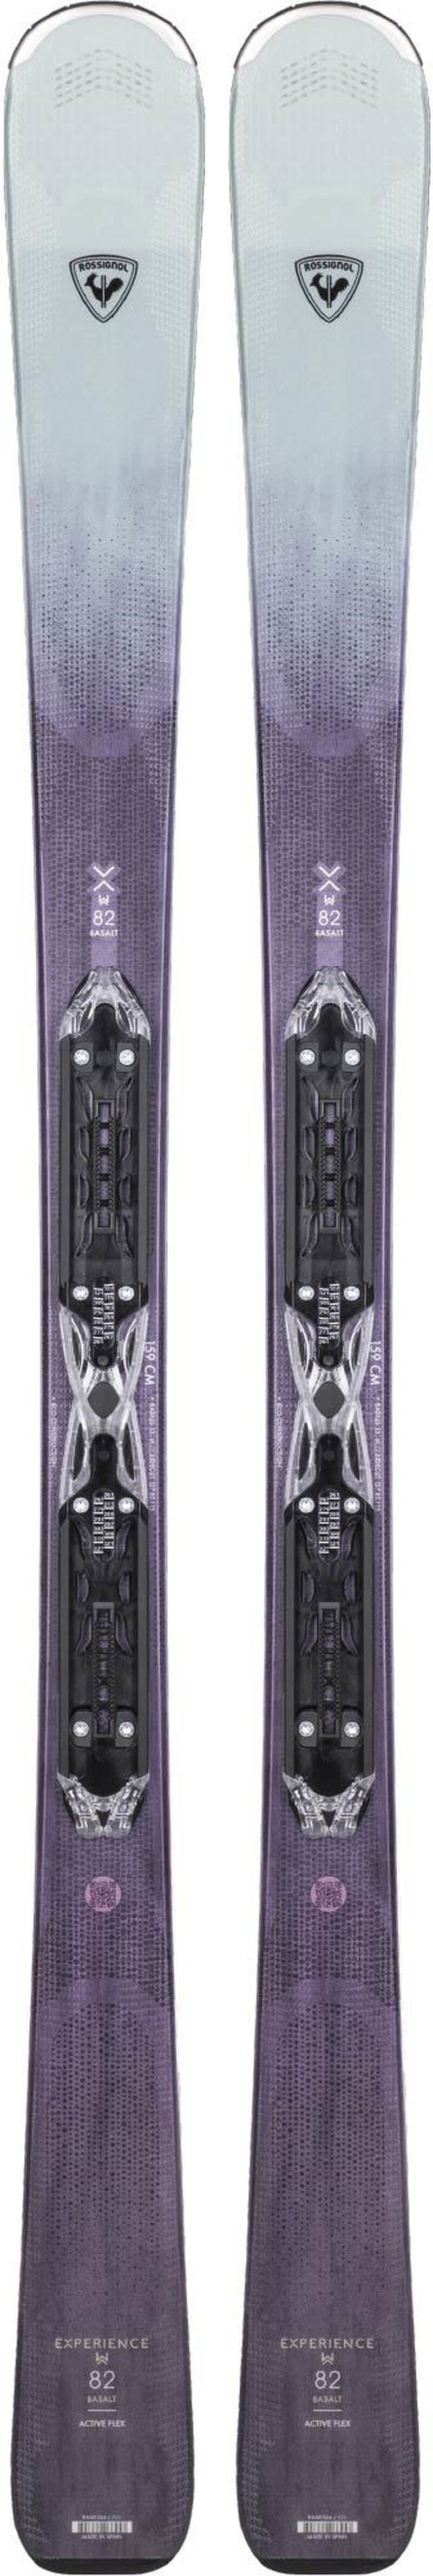 Rossignol Skis All Mountain femme EXPERIENCE W 82 BASALT (XPRESS) 